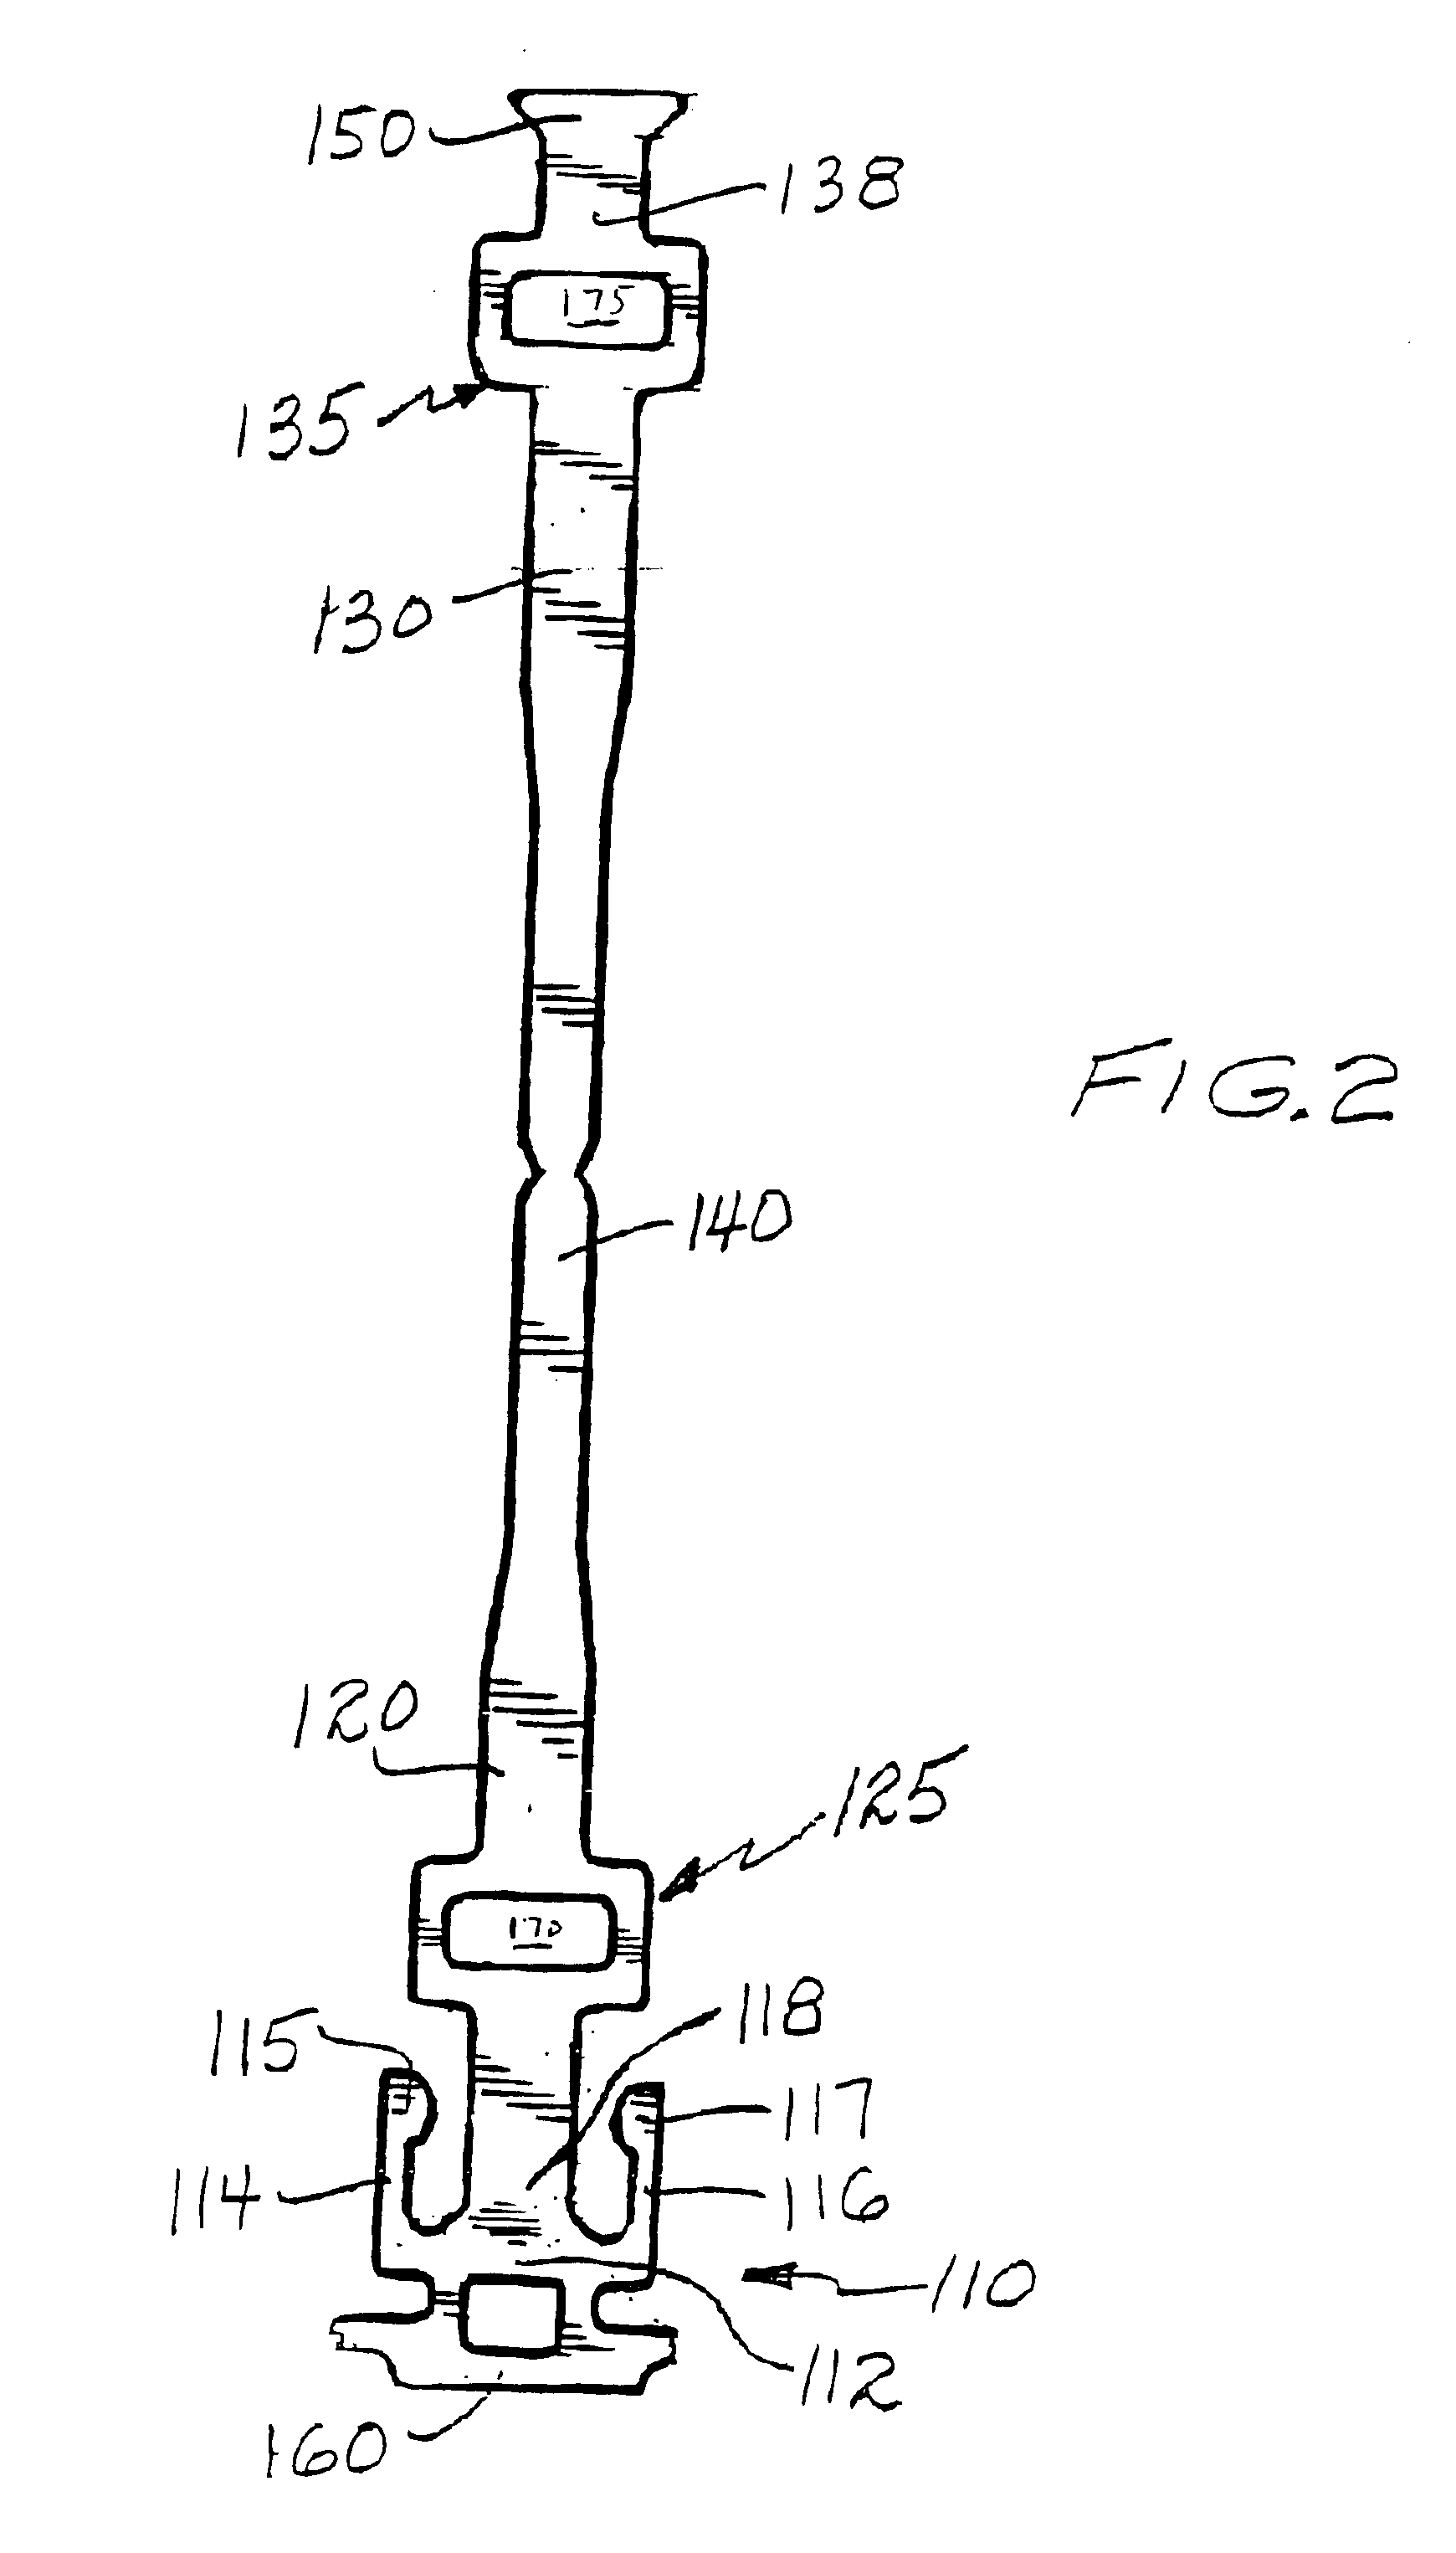 Compliant surface mount electrical contacts for circuit boards and method of making and using same